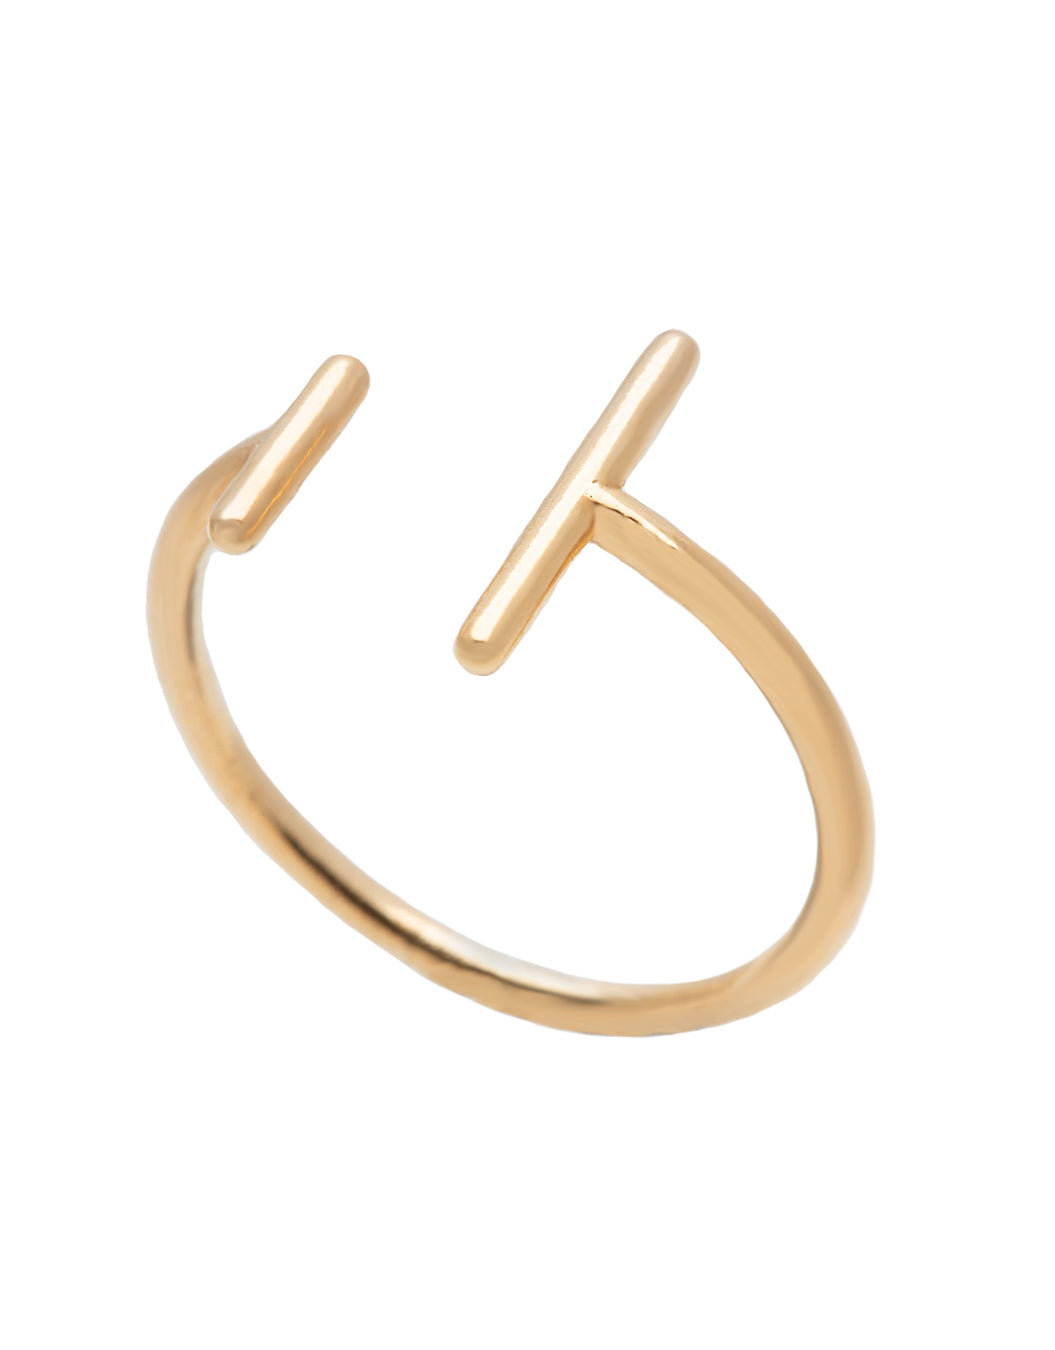 A dainty 14k yellow gold open pinky ring